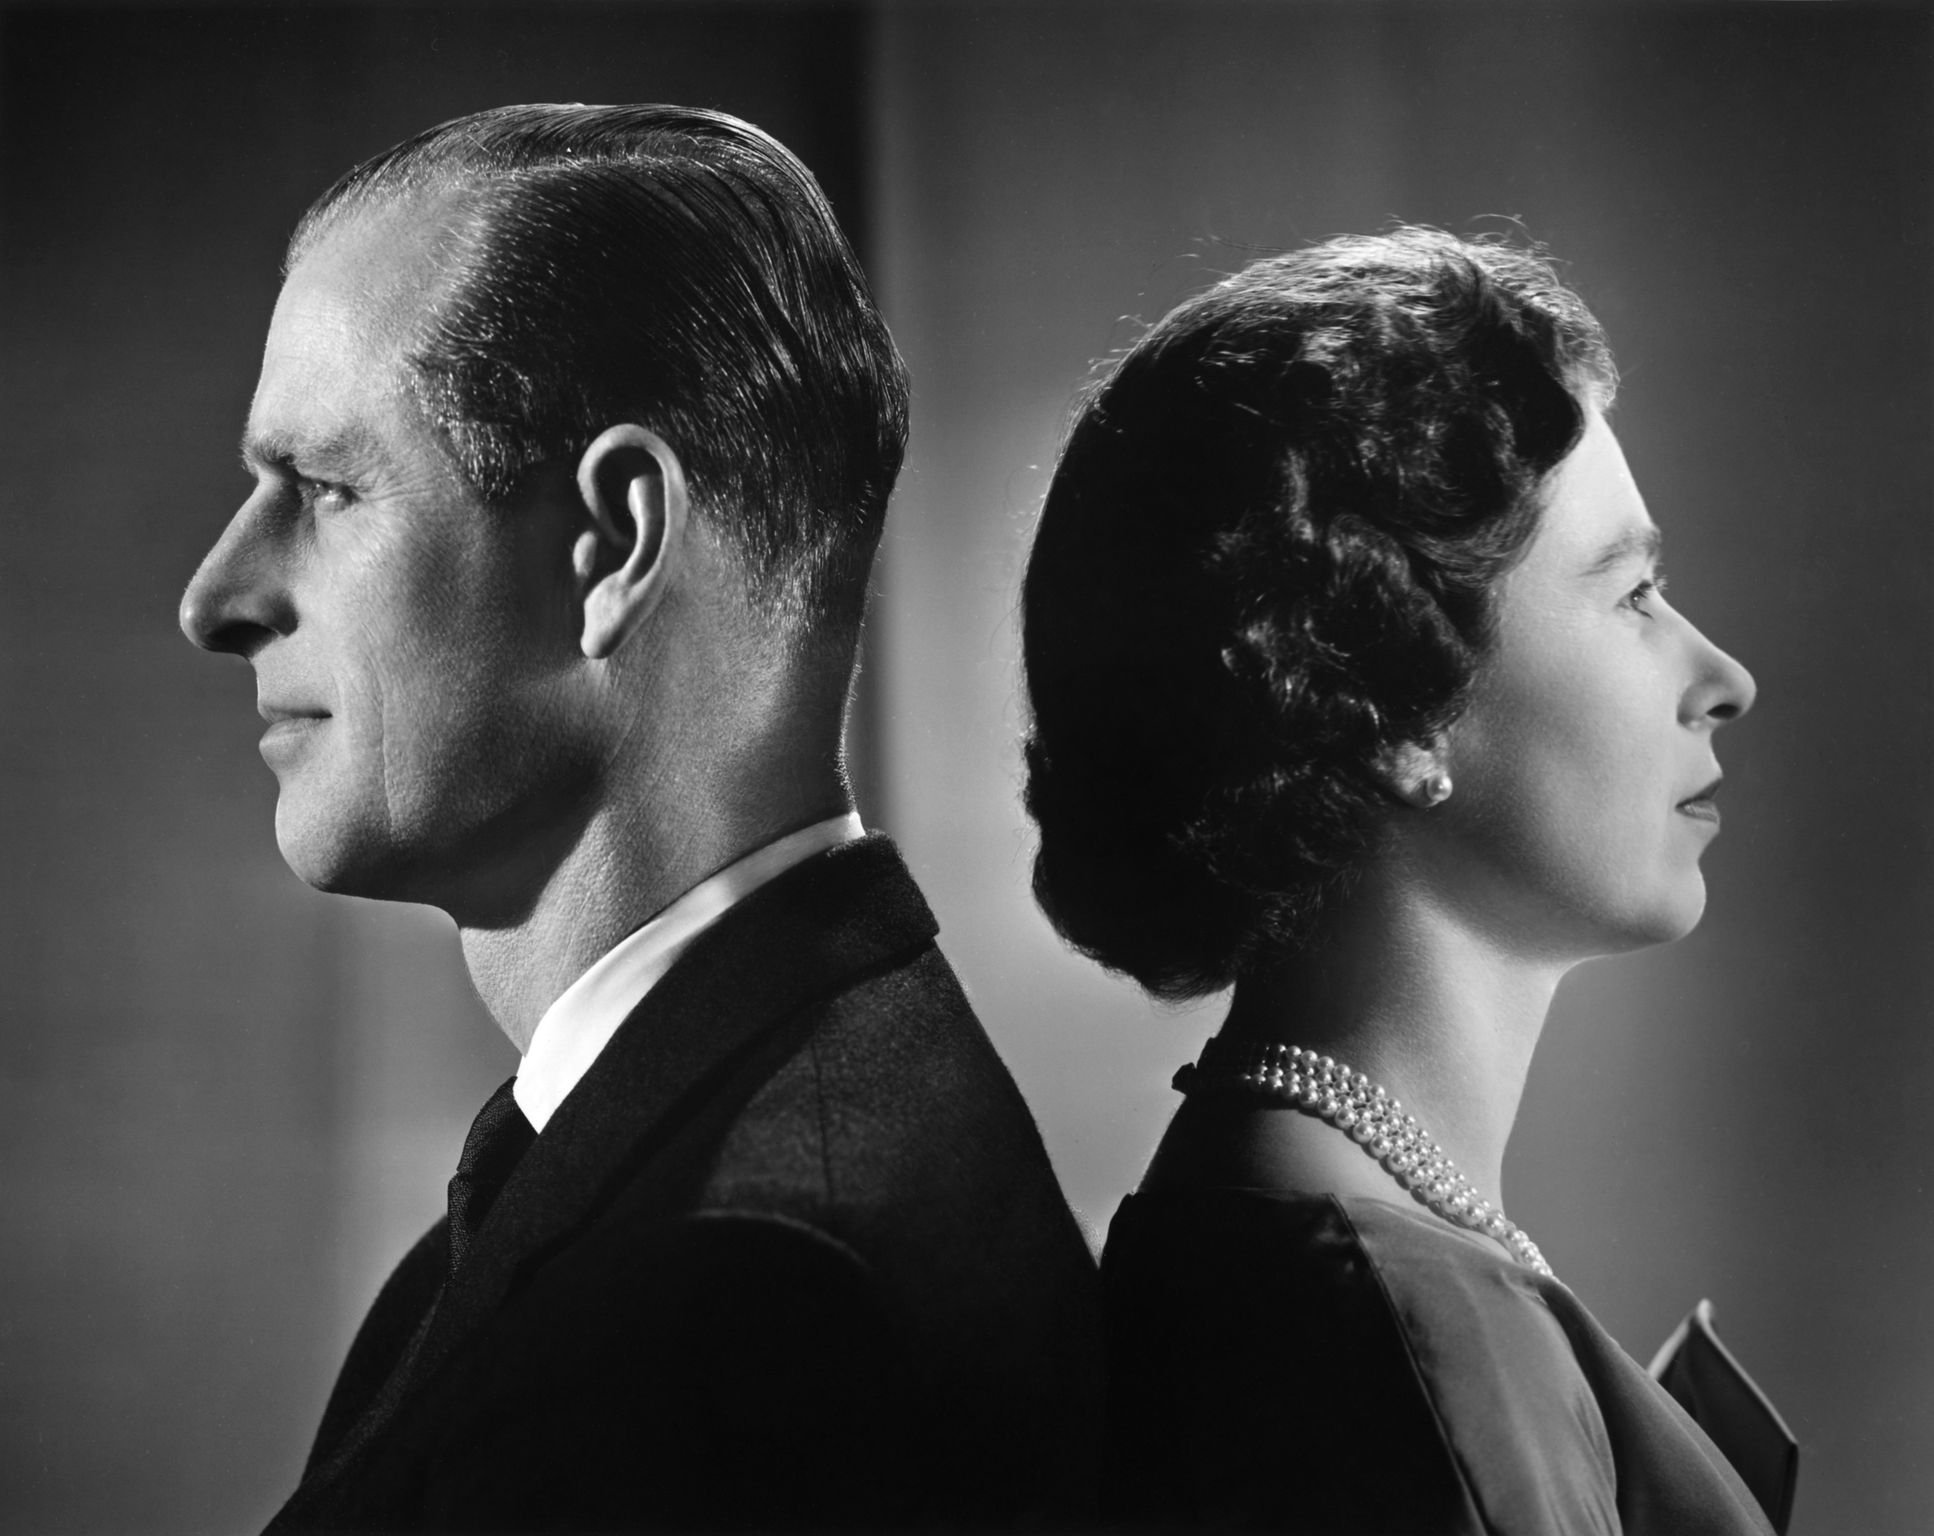 Queen Elizabeth II and Prince Philip, Duke of Edinburgh posing for a portrait in Buckingham Palace in1958 in London, England | Source: Getty Images